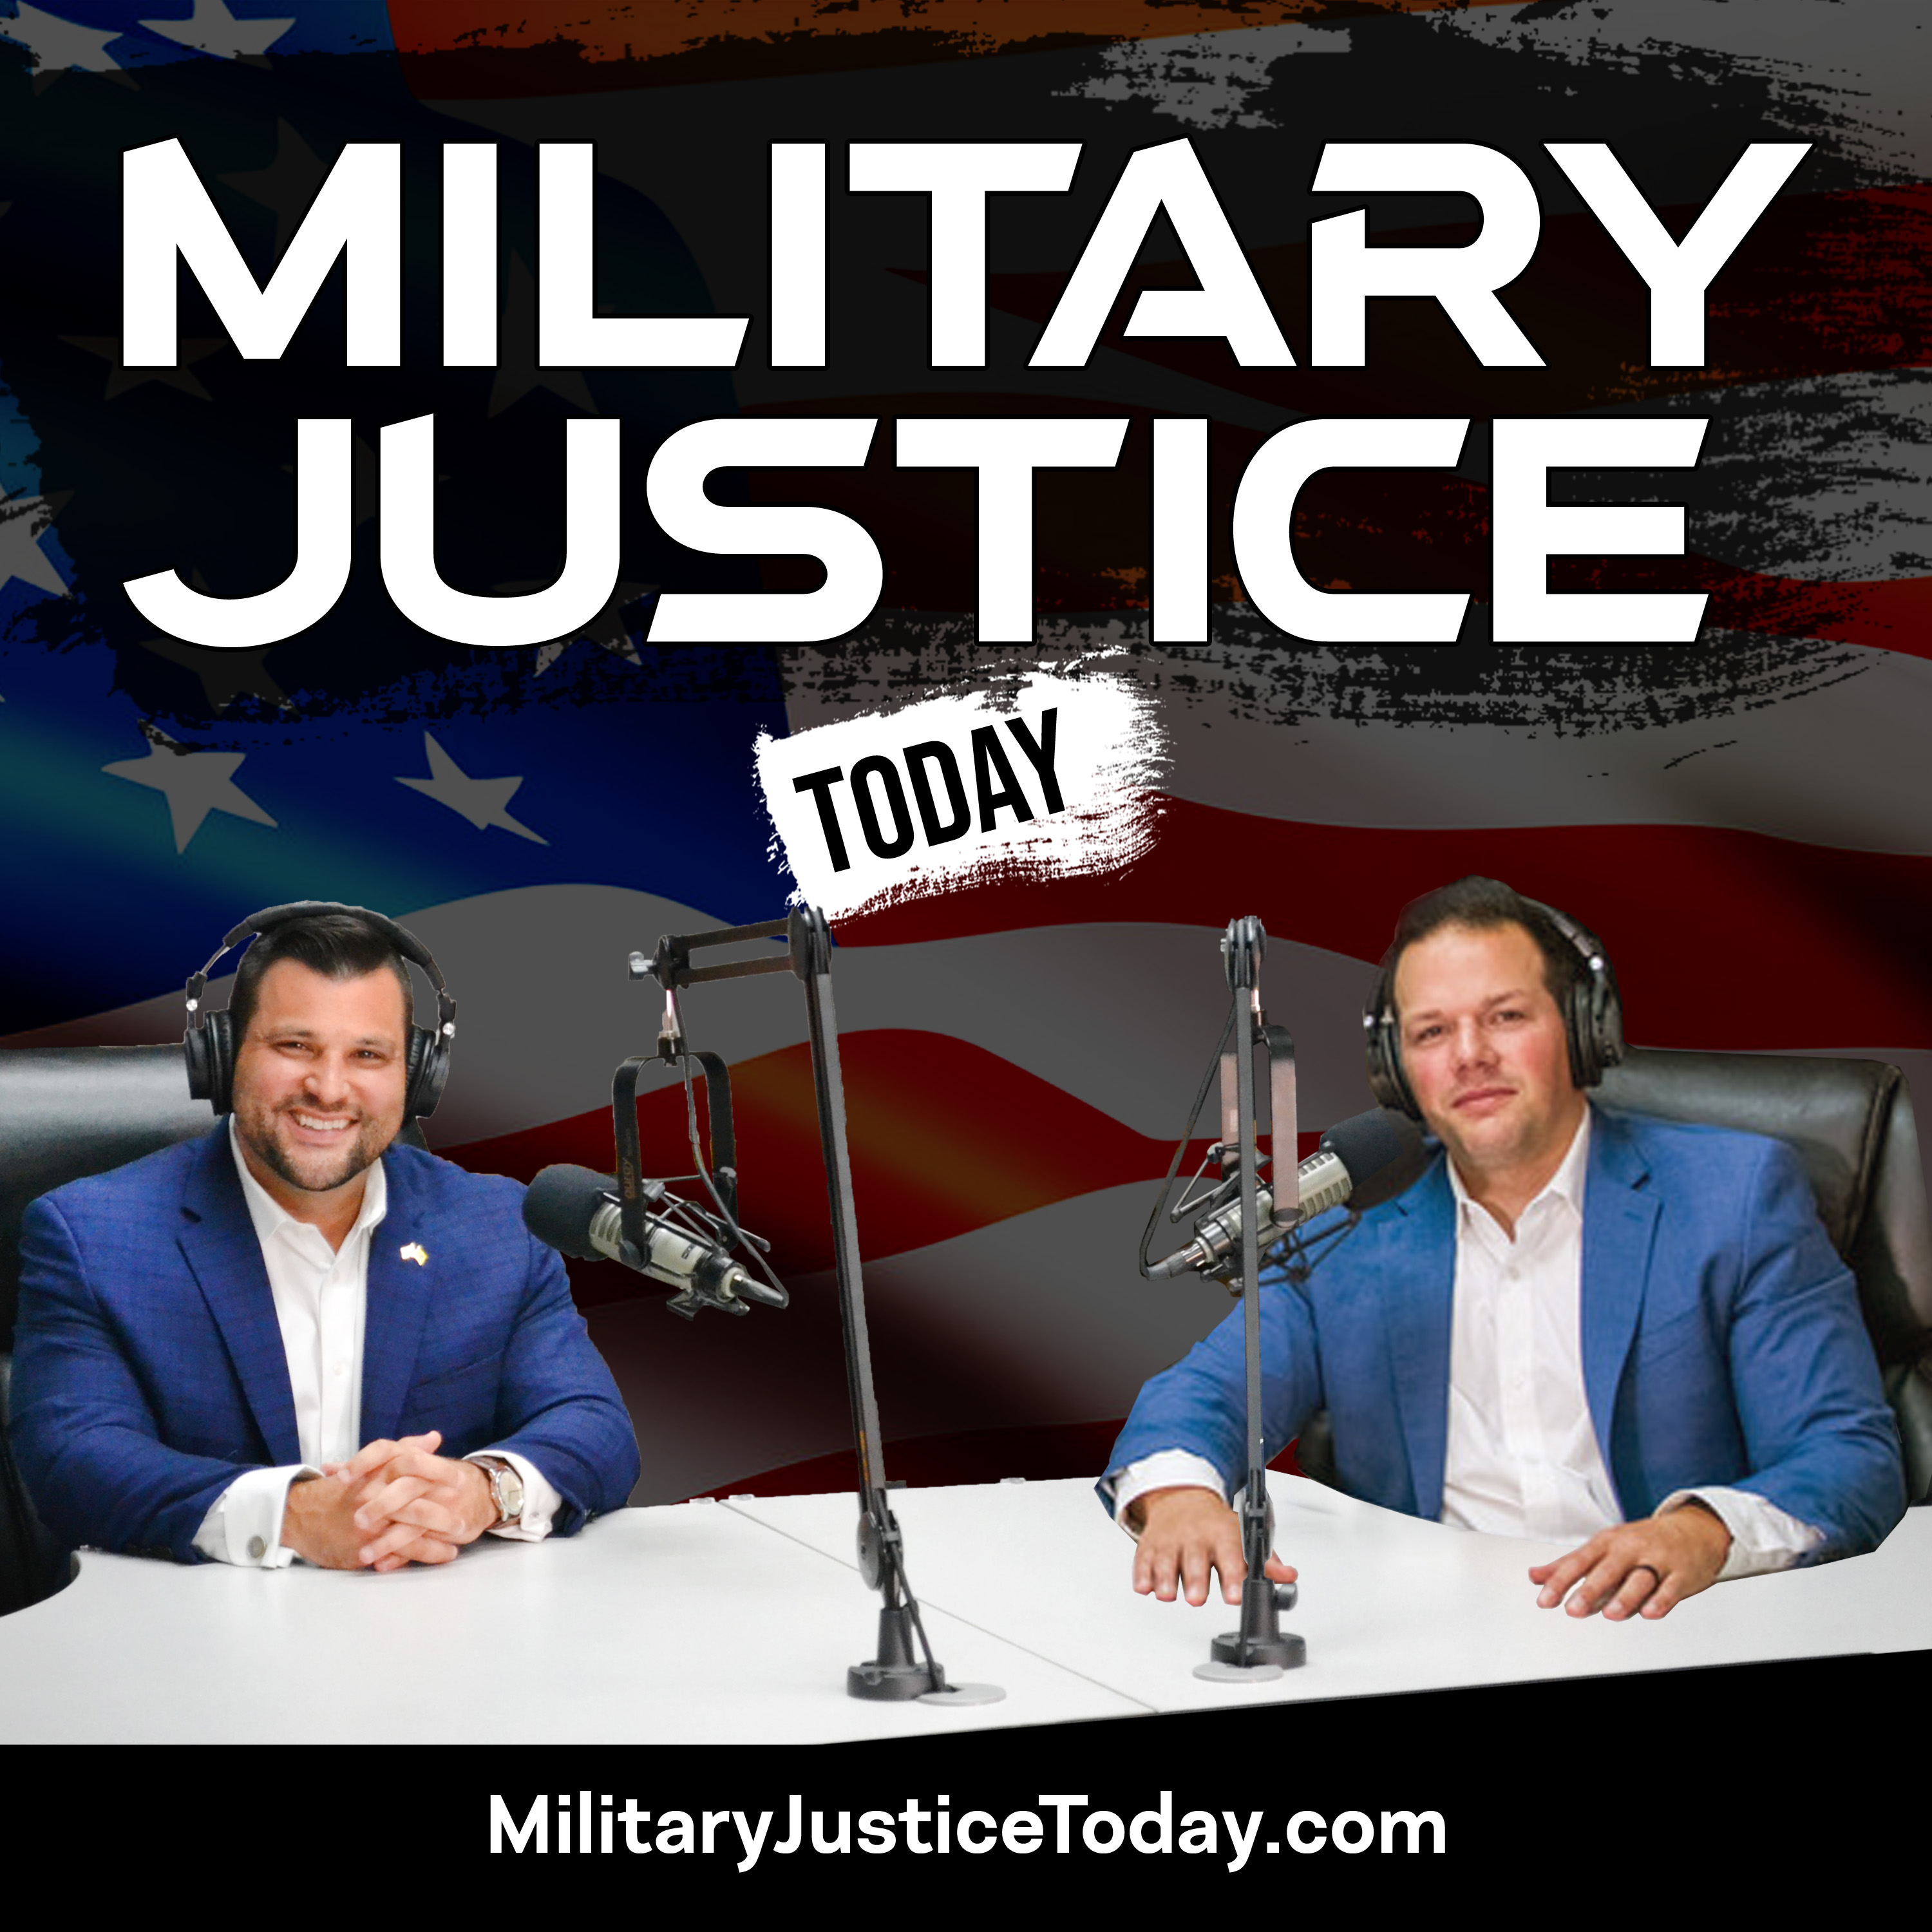  Long Overdue Changes that Should Be Made to the U.S. Military Justice System